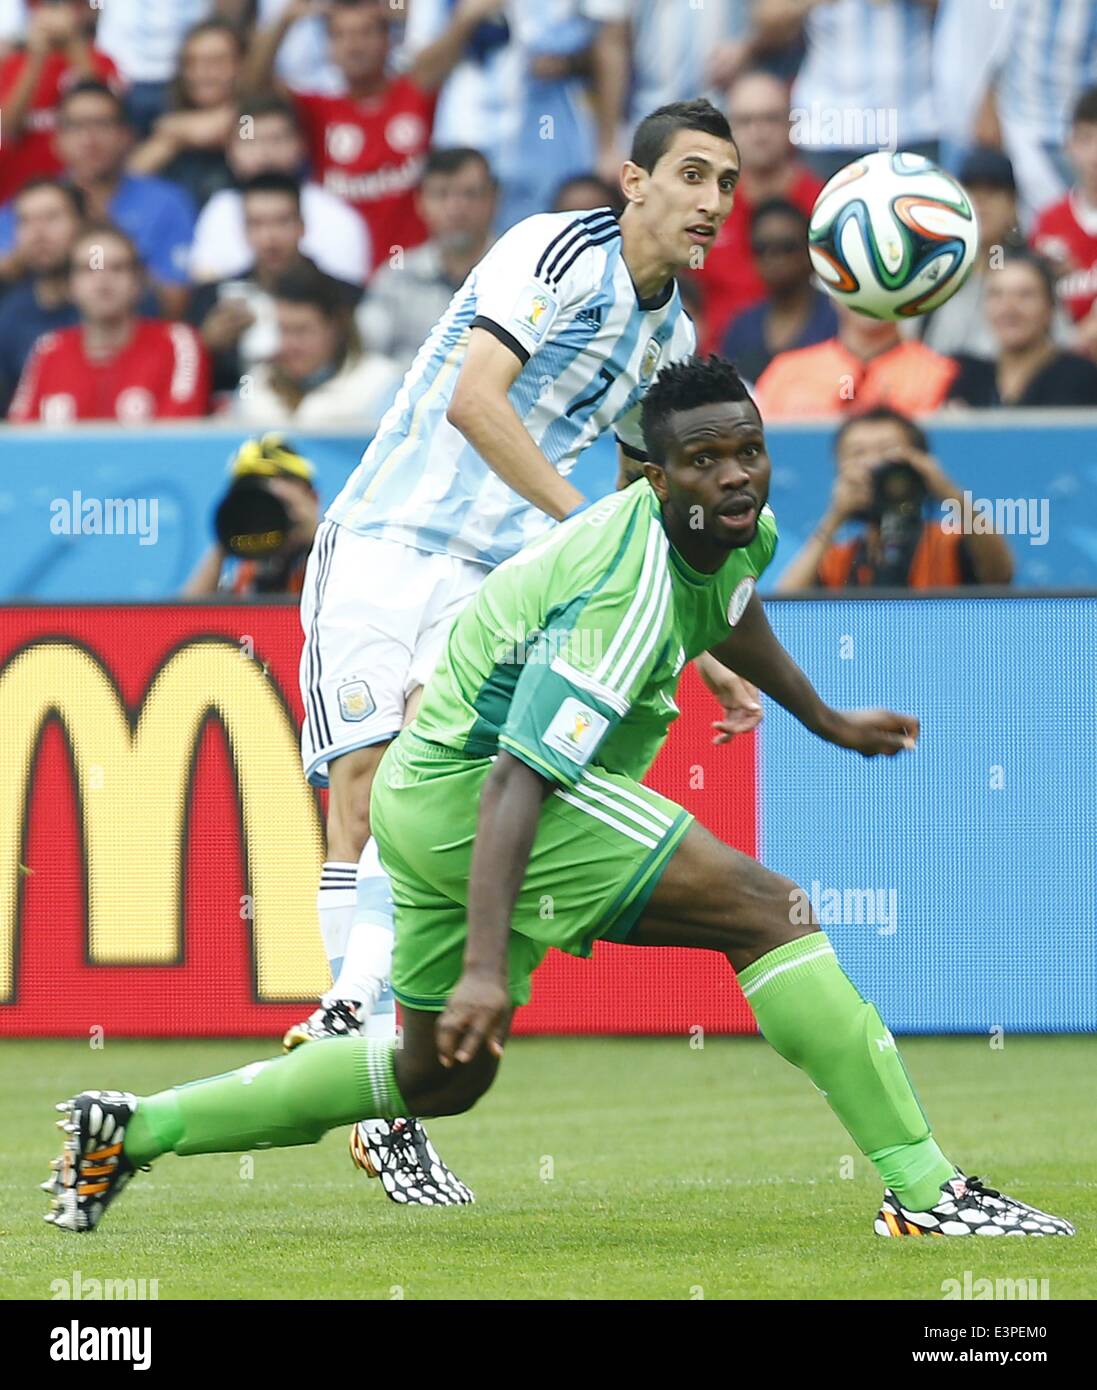 Porto Alegre, Brazil. 25th June, 2014. Argentina's Angel Di Maria (back) vies with Nigeria's Joseph Yobo during a Group F match between Nigeria and Argentina of 2014 FIFA World Cup at the Estadio Beira-Rio Stadium in Porto Alegre, Brazil, on June 25, 2014. © Chen Jianli/Xinhua/Alamy Live News Stock Photo